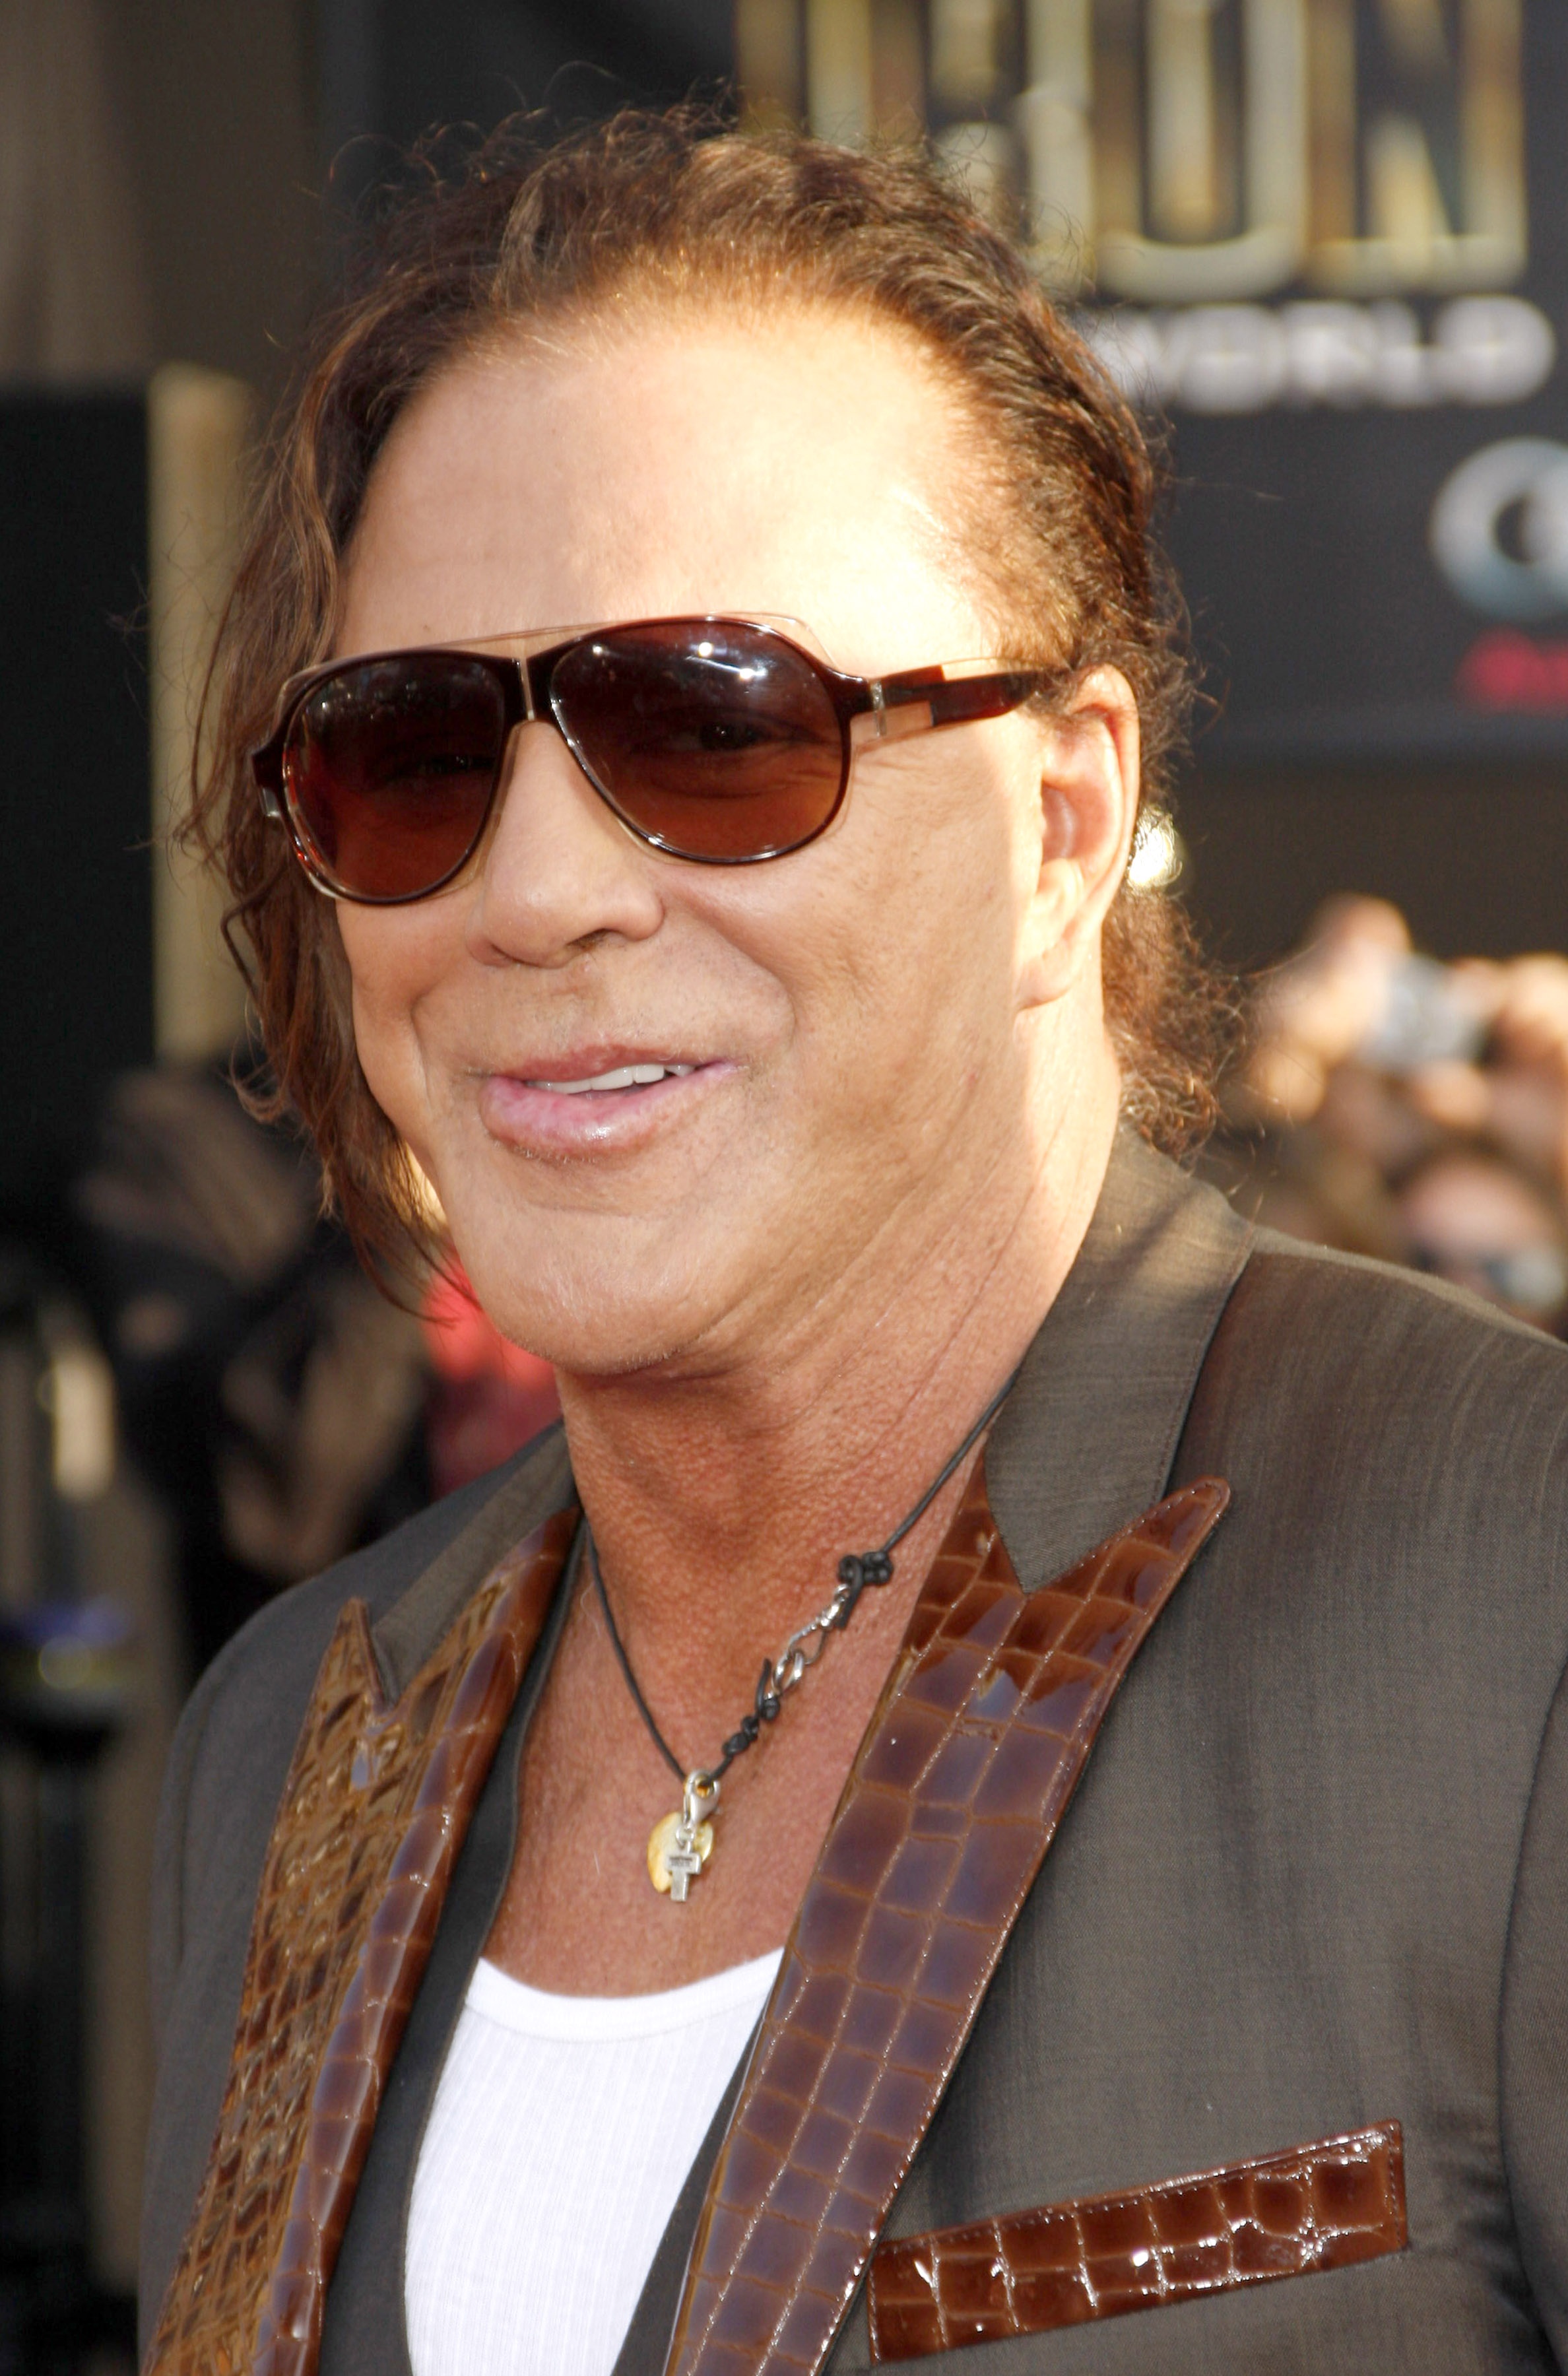 Mickey Rourke at the world premiere of "Iron Man 2," 2010 | Source: Getty Images